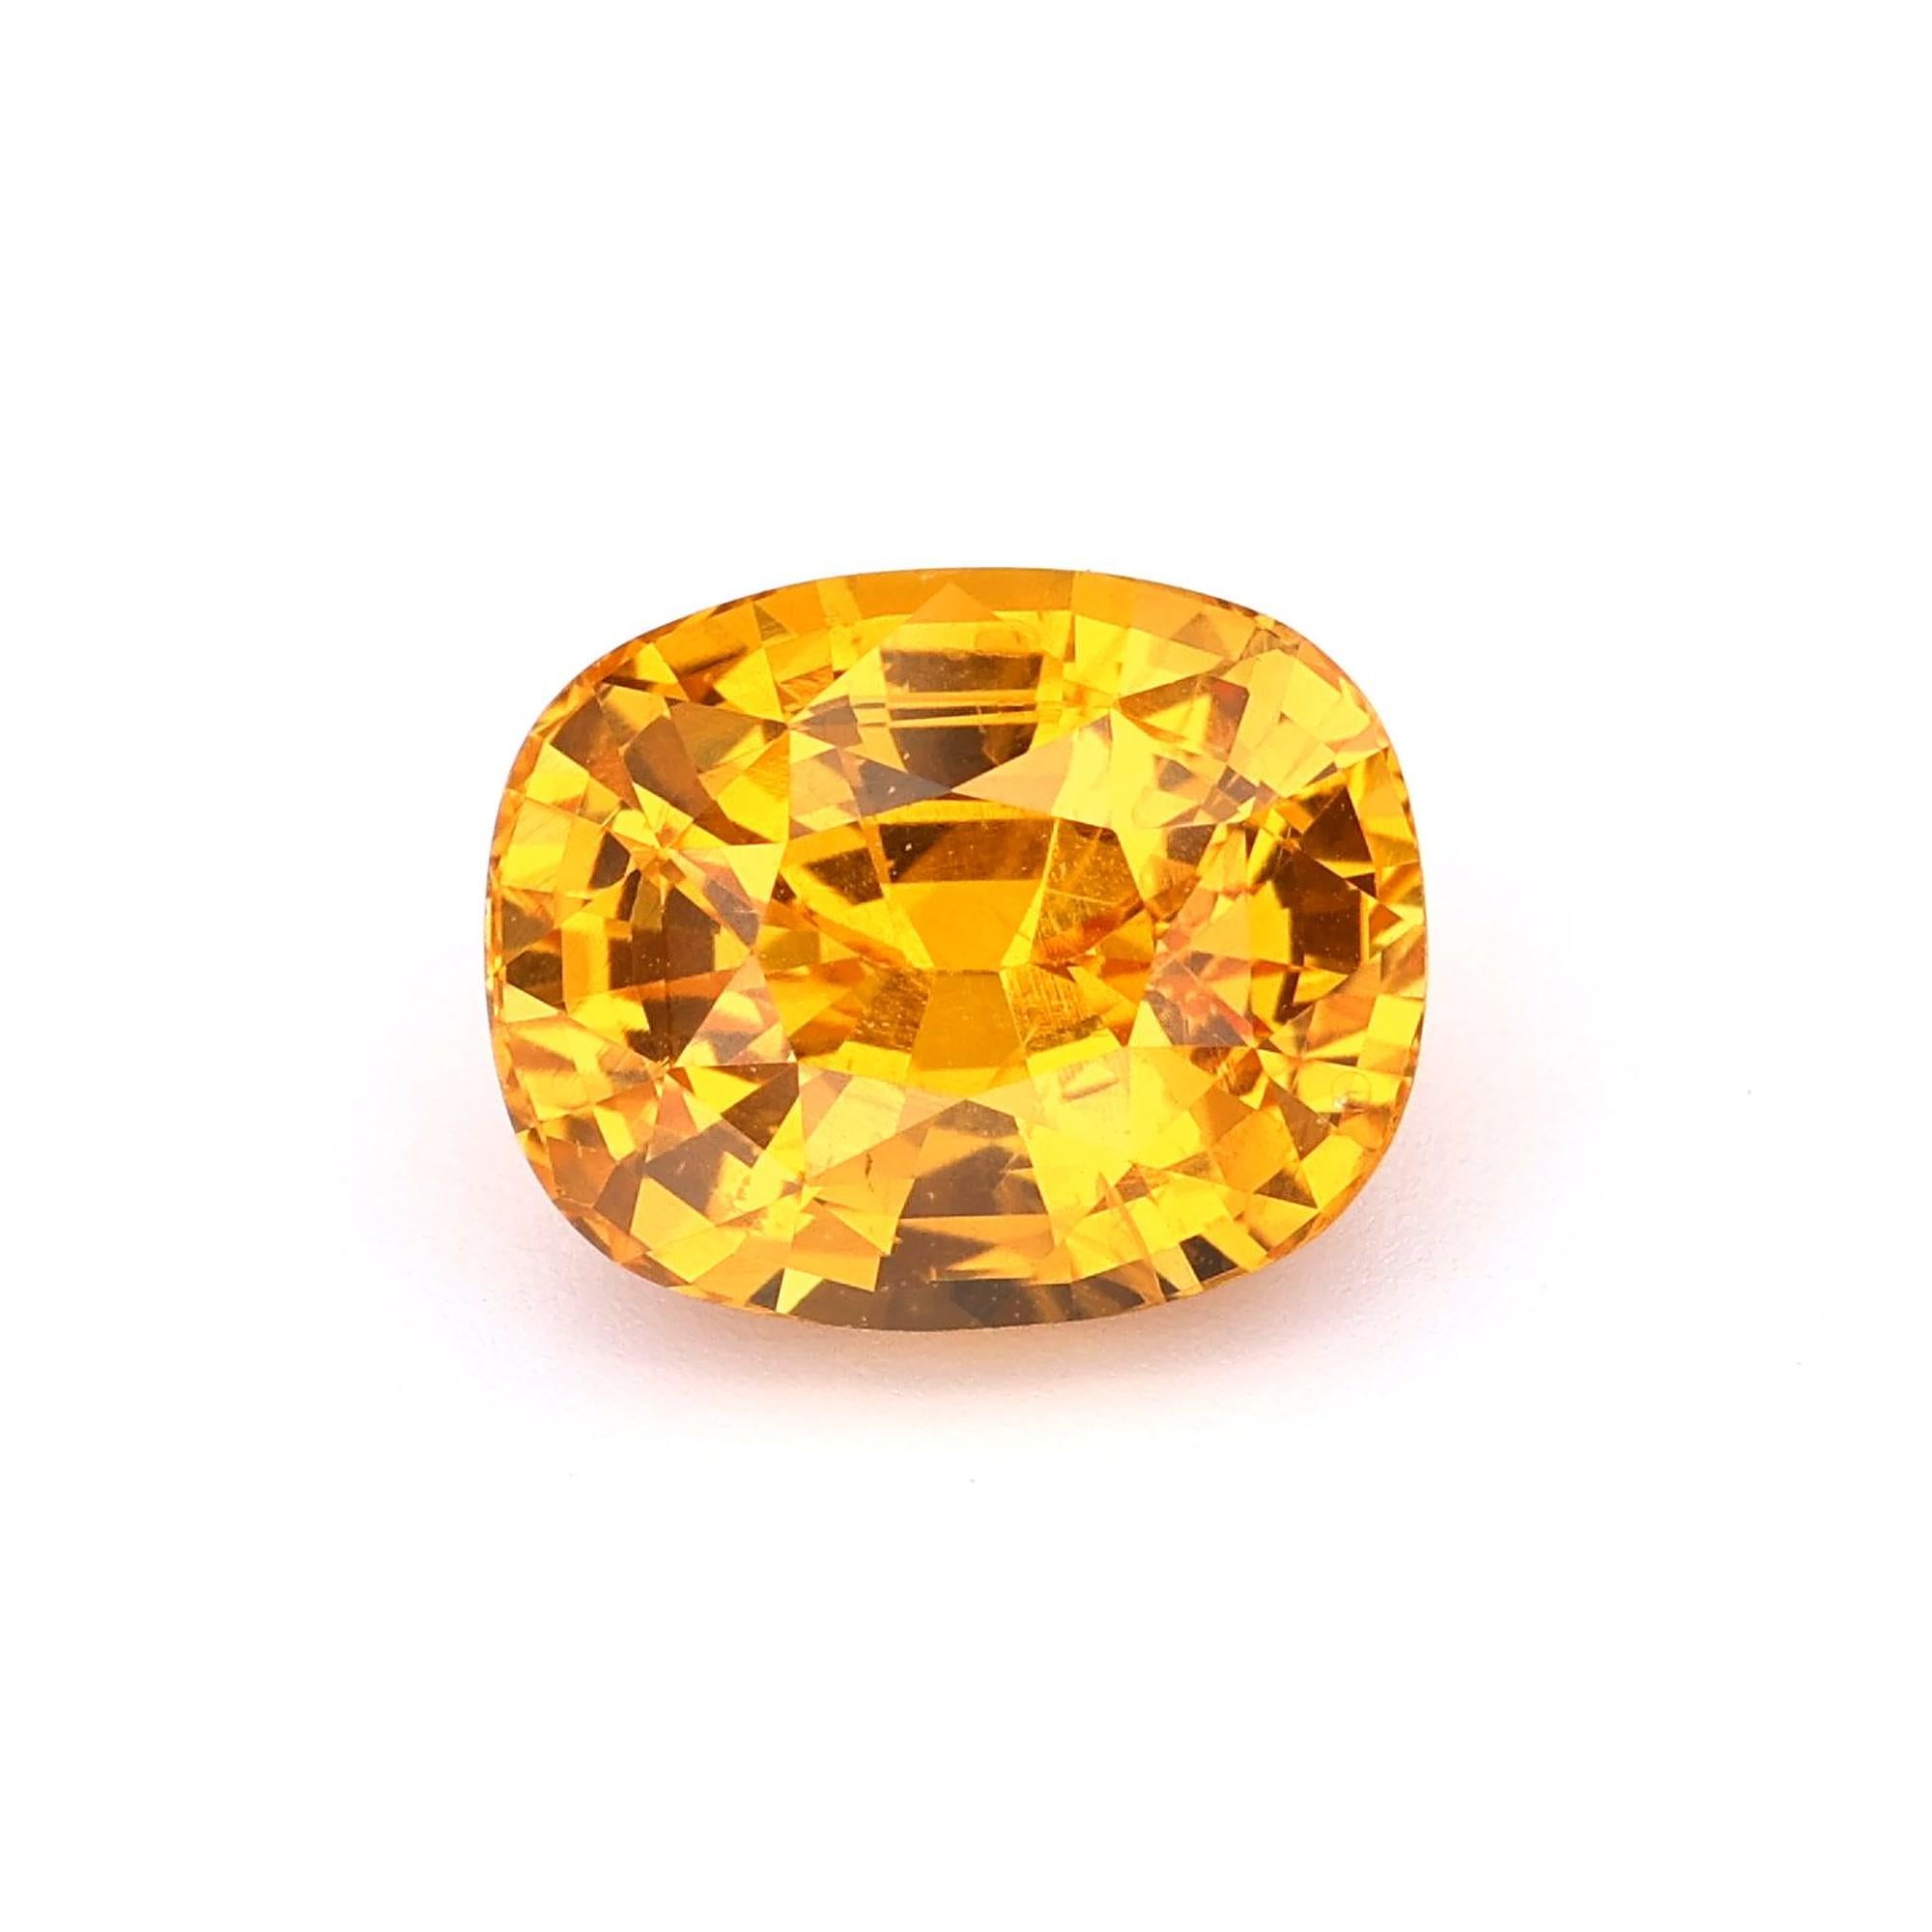 Natural Yellow Sapphire cushion shape Gemstone, This exquisite gemstone originates from Ceylon (Sri Lanka), known for producing exceptional quality stones. With its internally flawless clarity.

• Variety: Yellow Sapphire 
• Origin: Sri Lanka